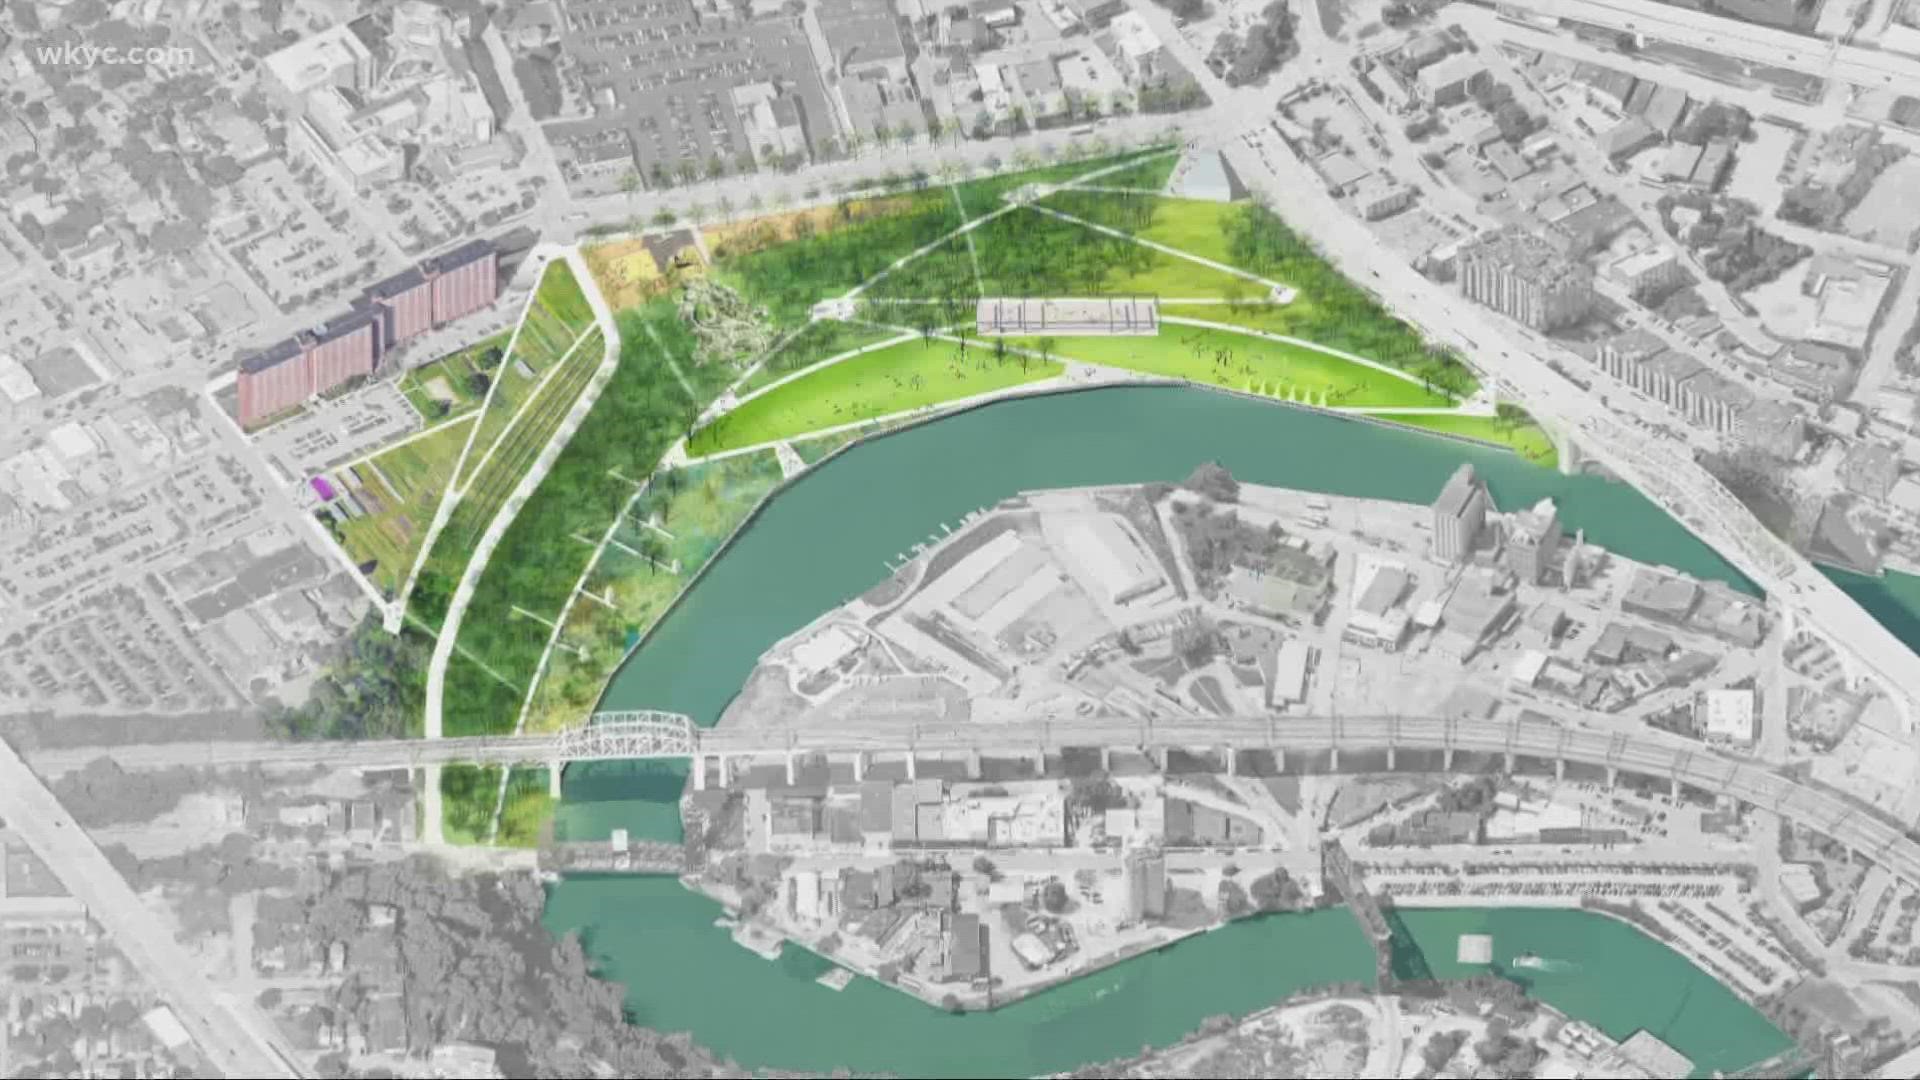 The IrishTown Bend project is full steam ahead. The project looks to unite the Flats, downtown Cleveland, and Ohio City. Lynna Lai reports.